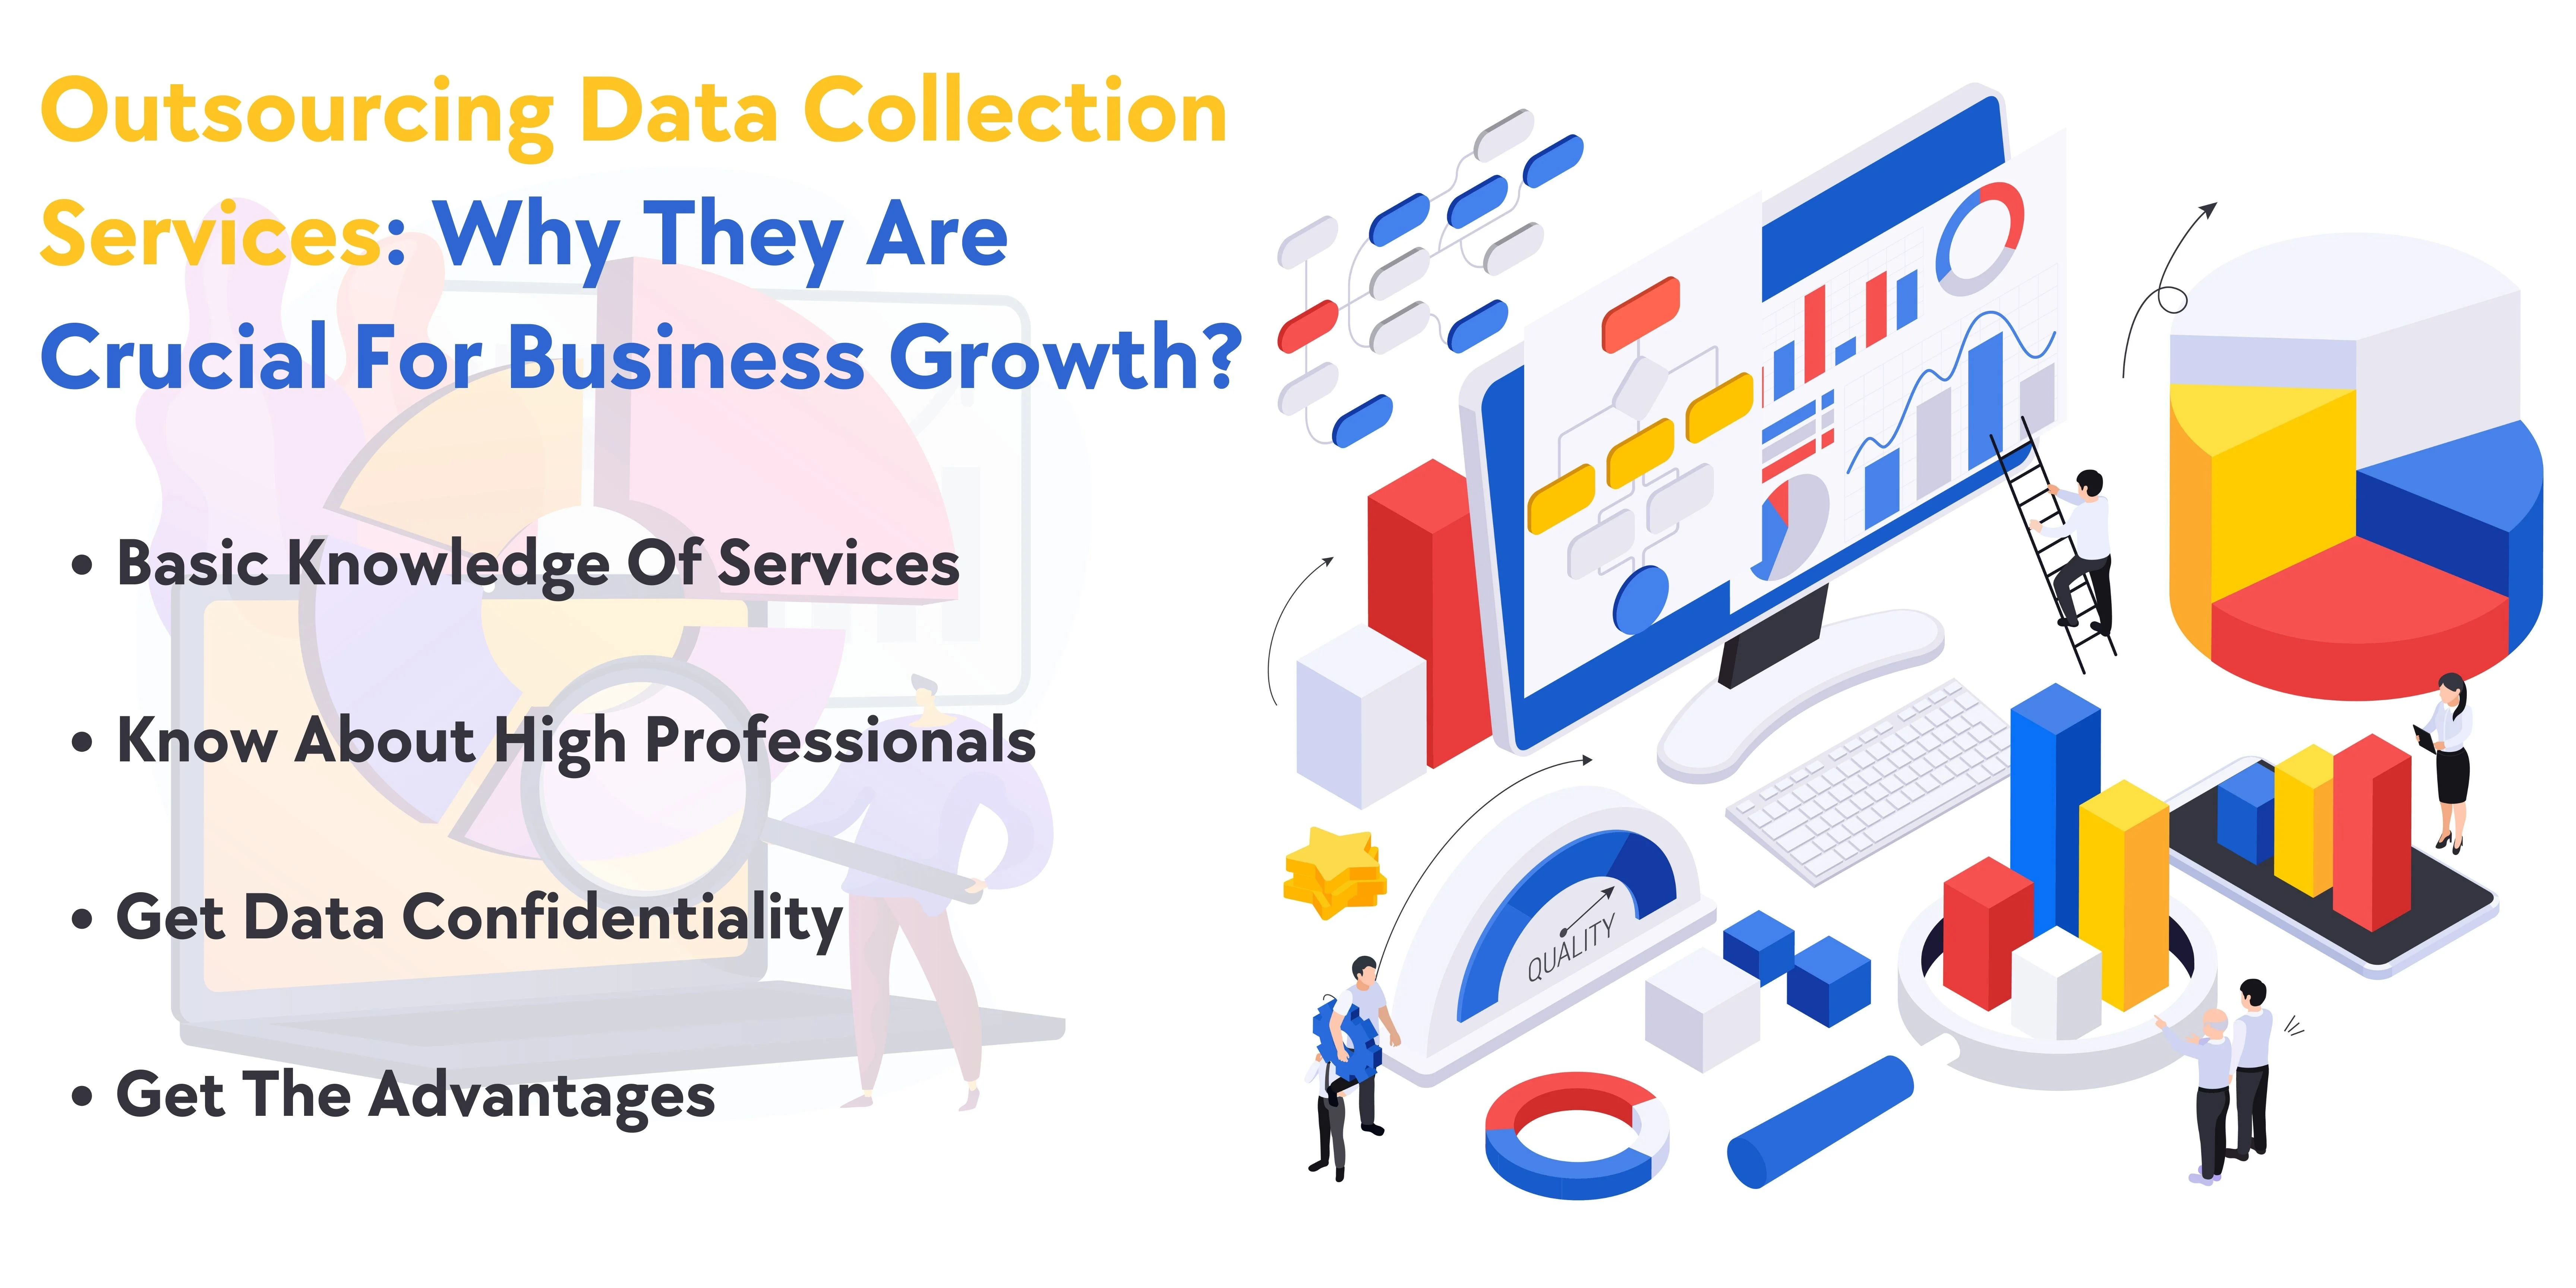 data conversion services 5 points to consider before outsourcing